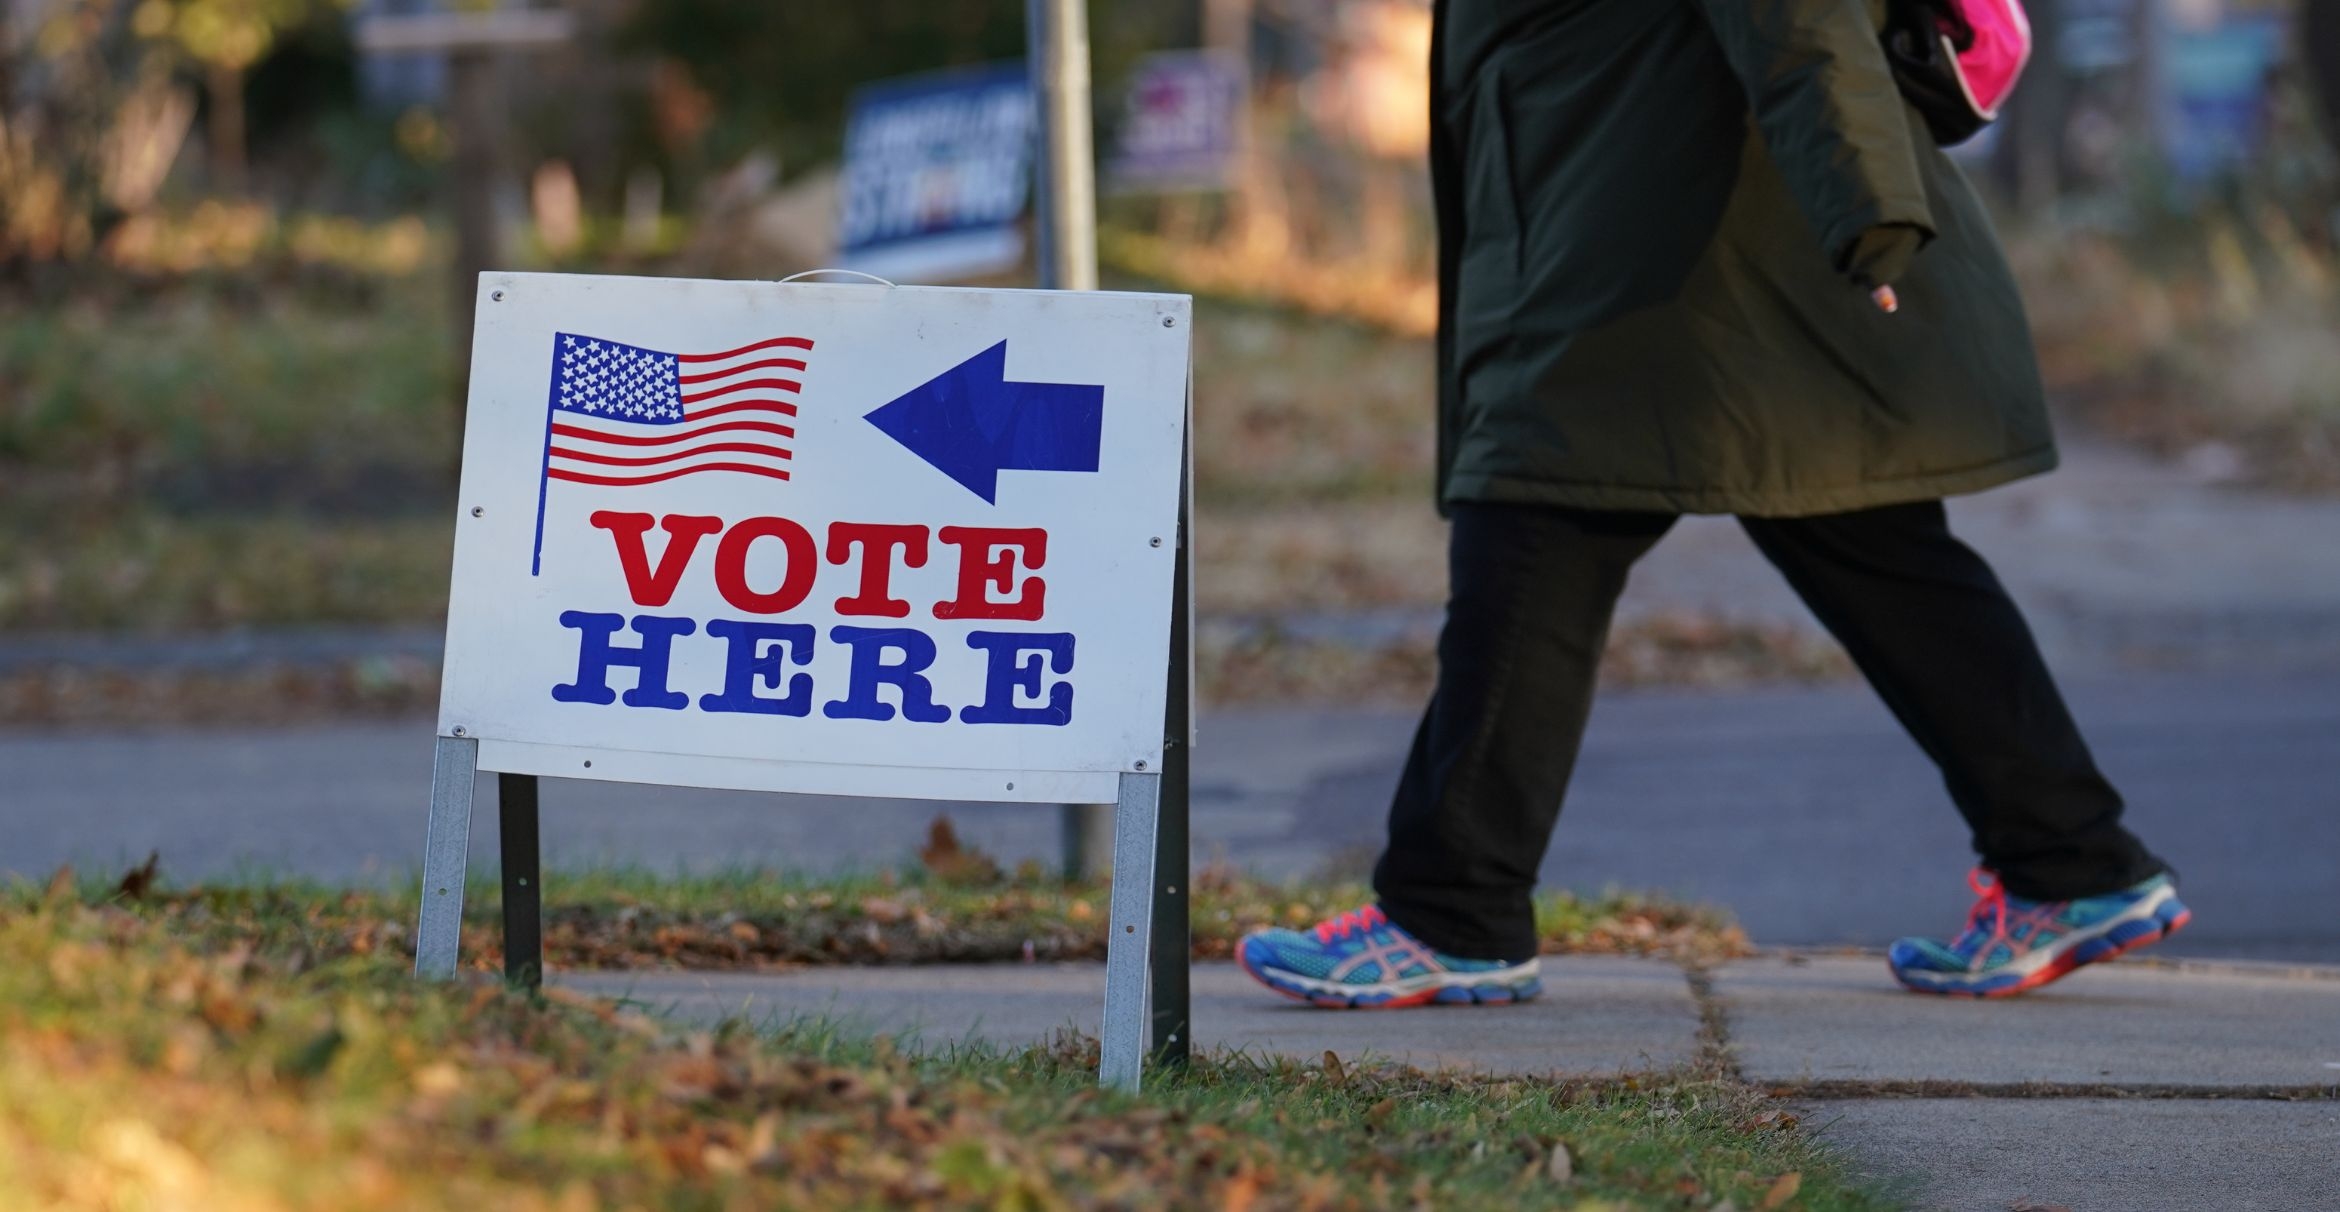 A person walks past a Vote Here sign in Minneapolis, Minnesota.